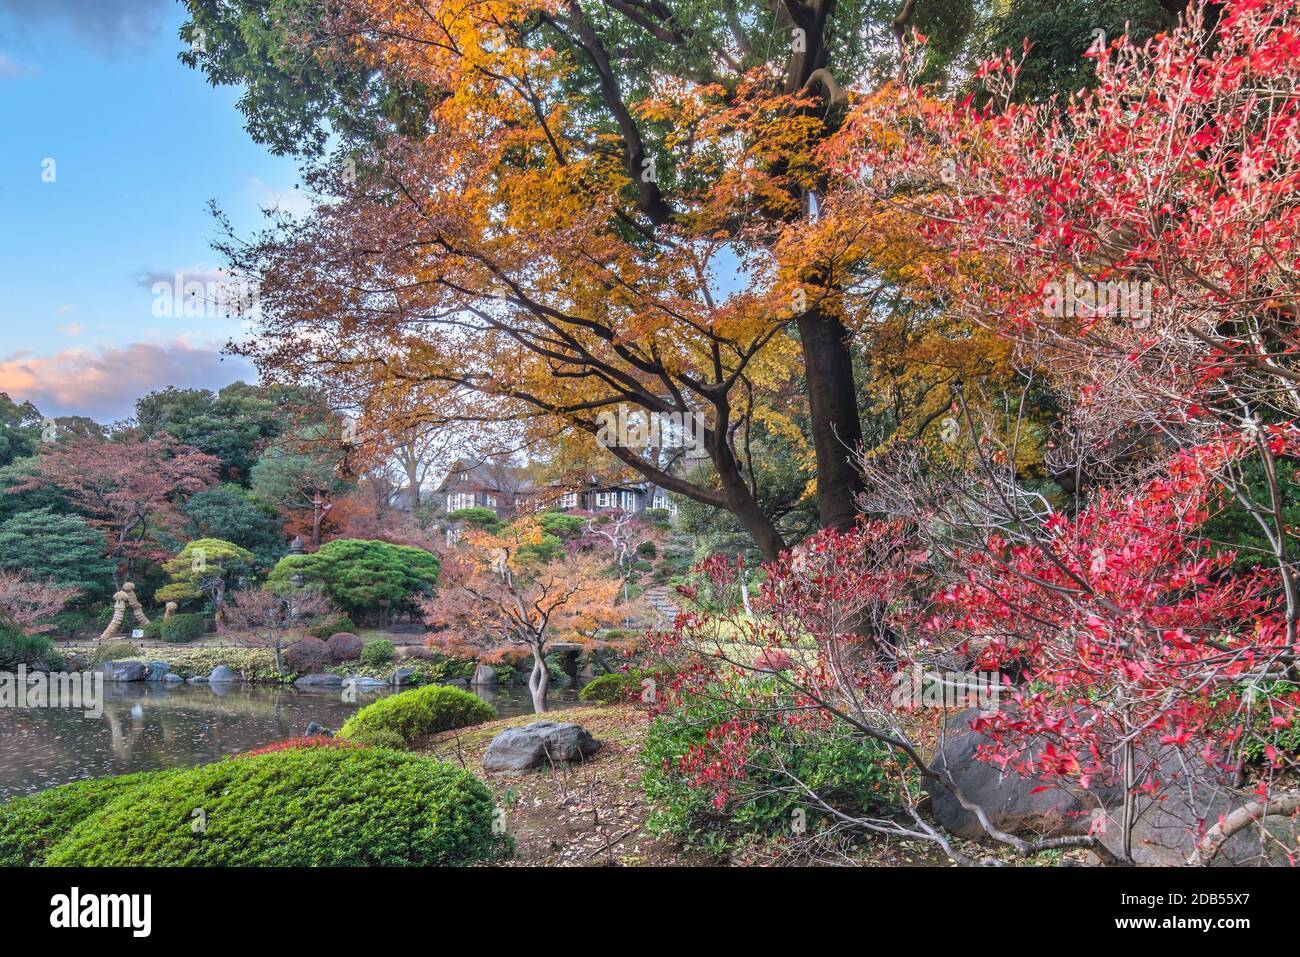 Tokyo Metropolitan Park KyuFurukawa's japanese garden's pine trees protected by a winter umbrella with a red and yellow maple momiji leaves background Stock Photo